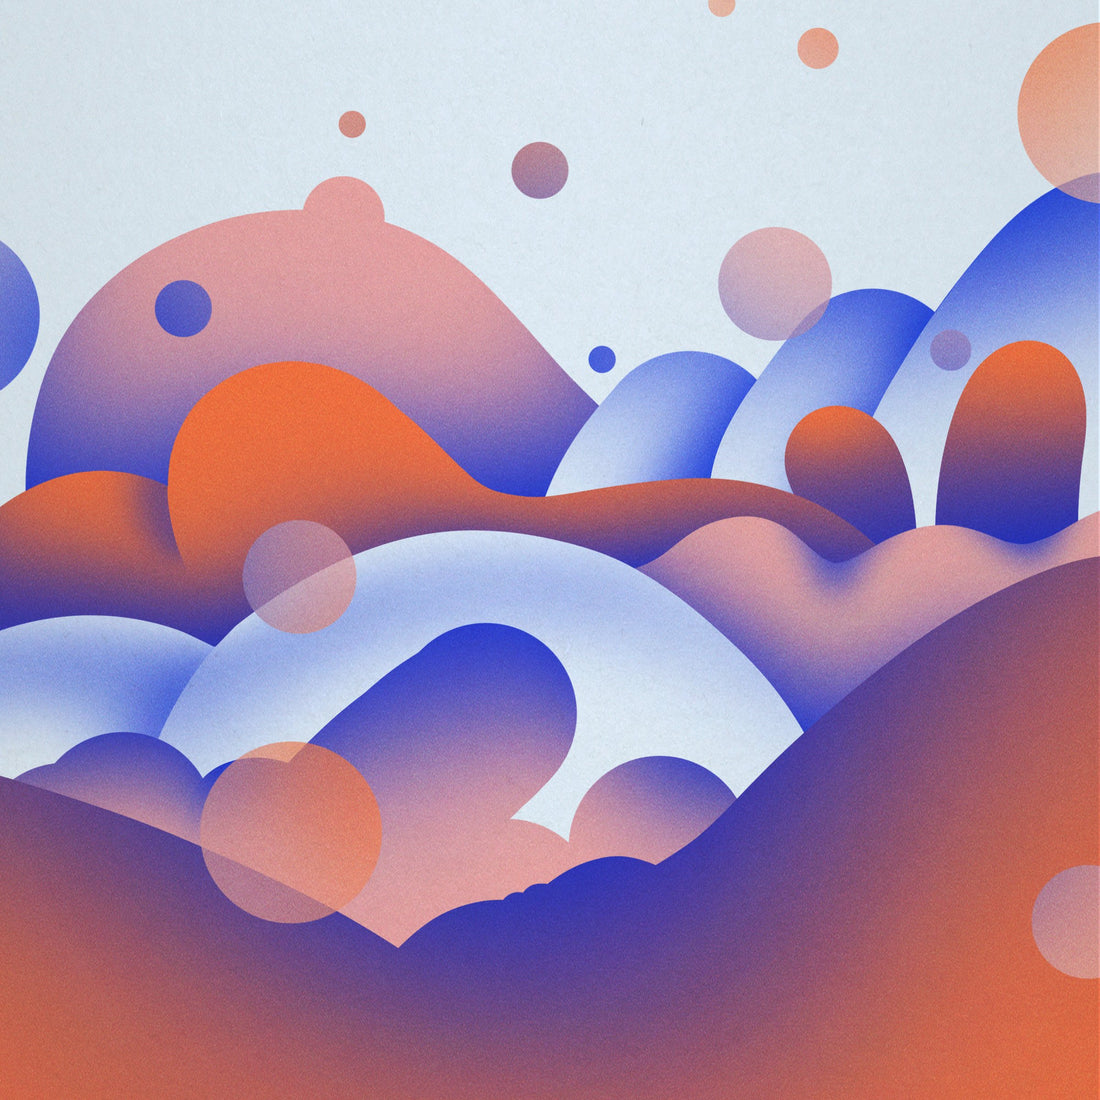 image shows ethereal rounded shapes, some resembling sexual symbols, in pinks, oranges, and blues.